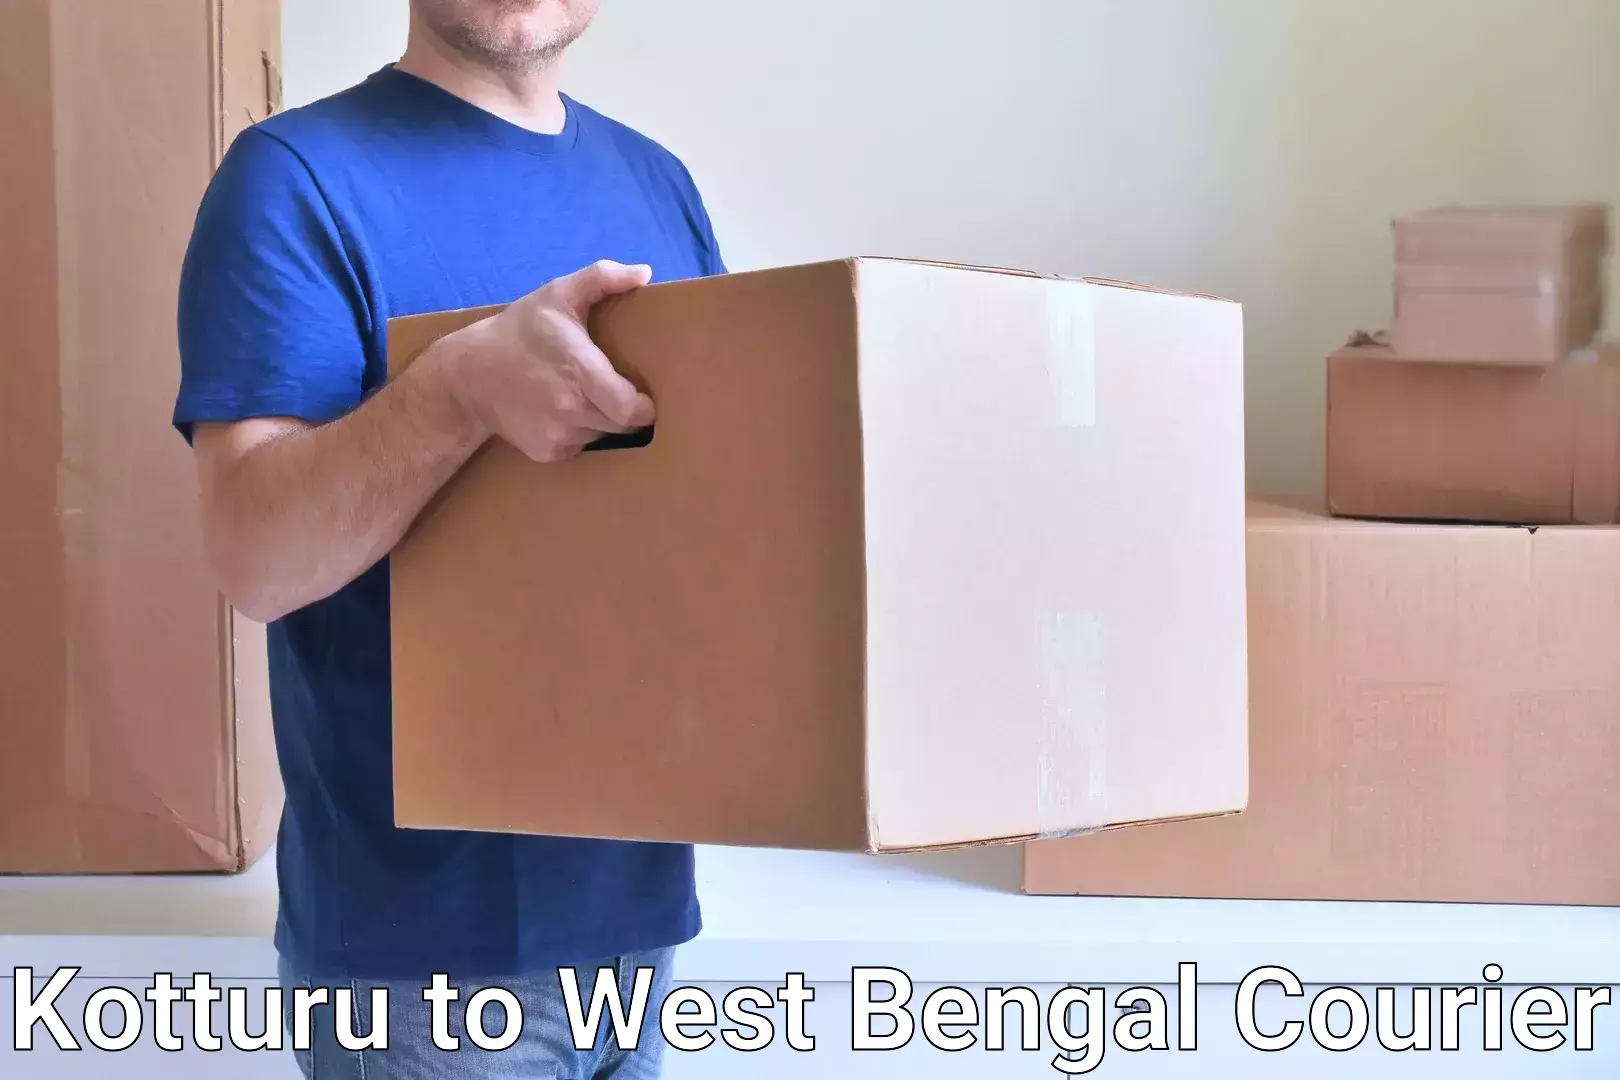 Automated shipping Kotturu to West Bengal